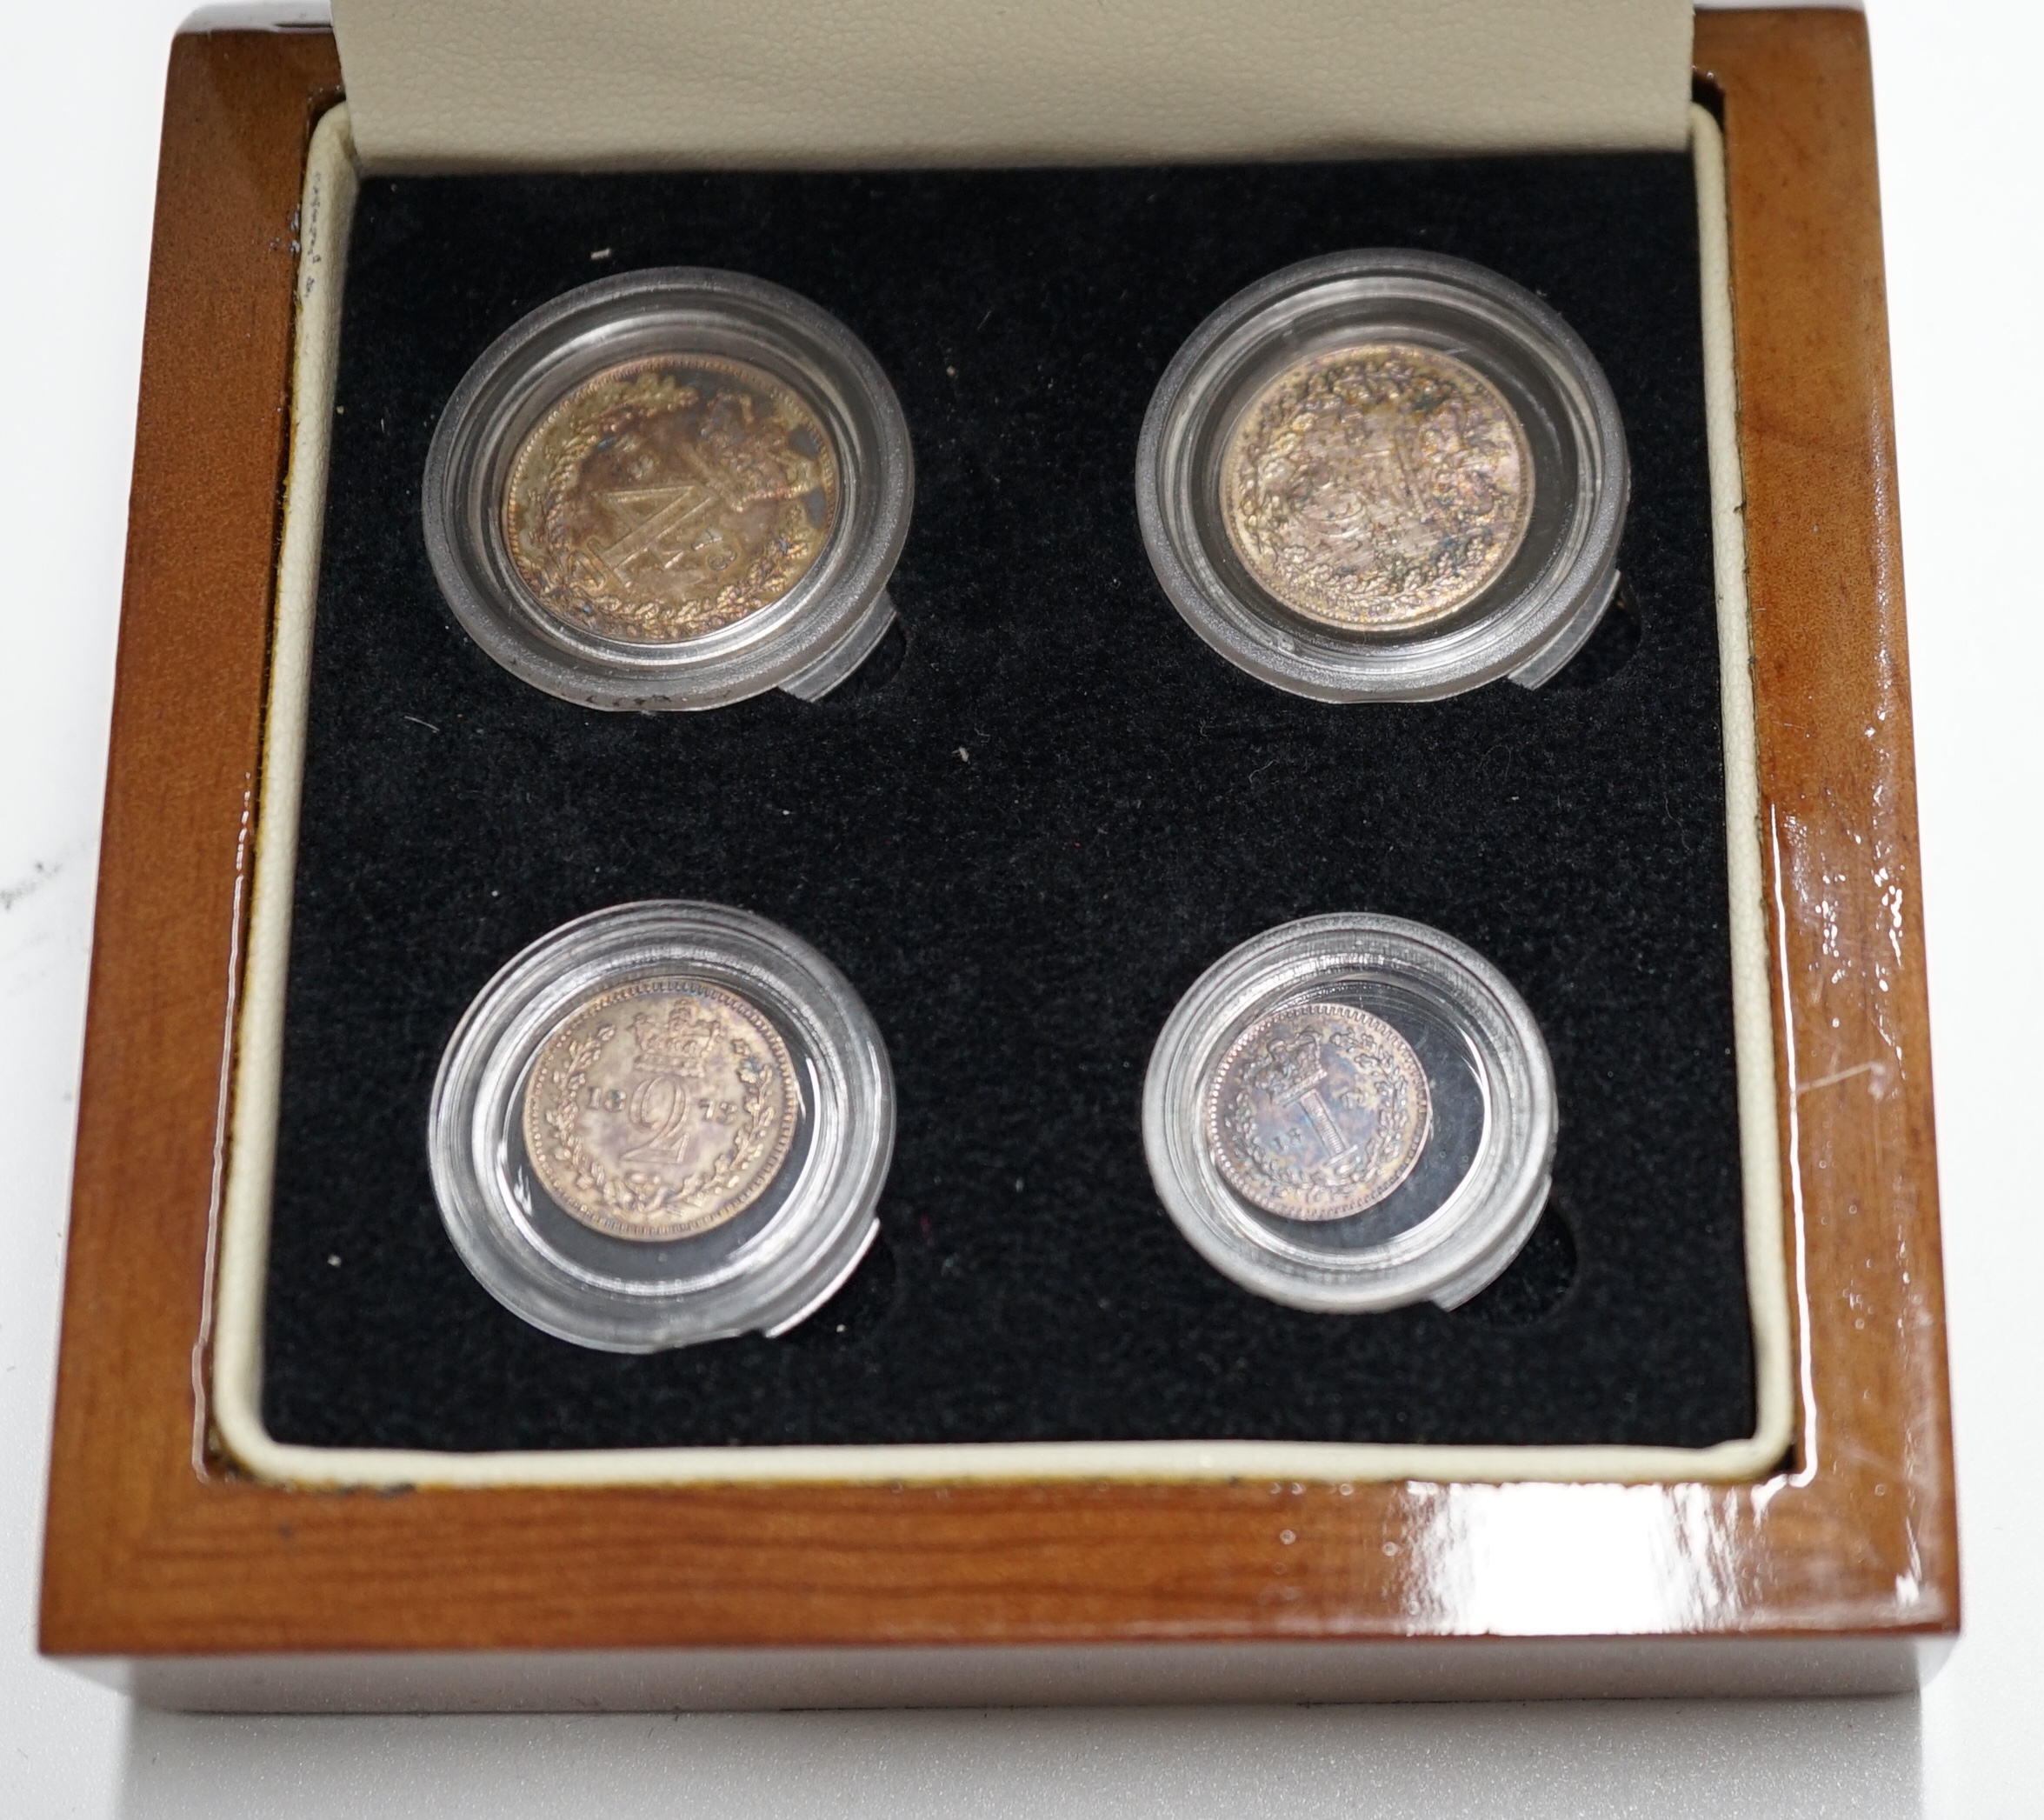 British silver coins, Victoria Young portrait four coin set of Maundy coins, 1873, toned UNC, London mint office case